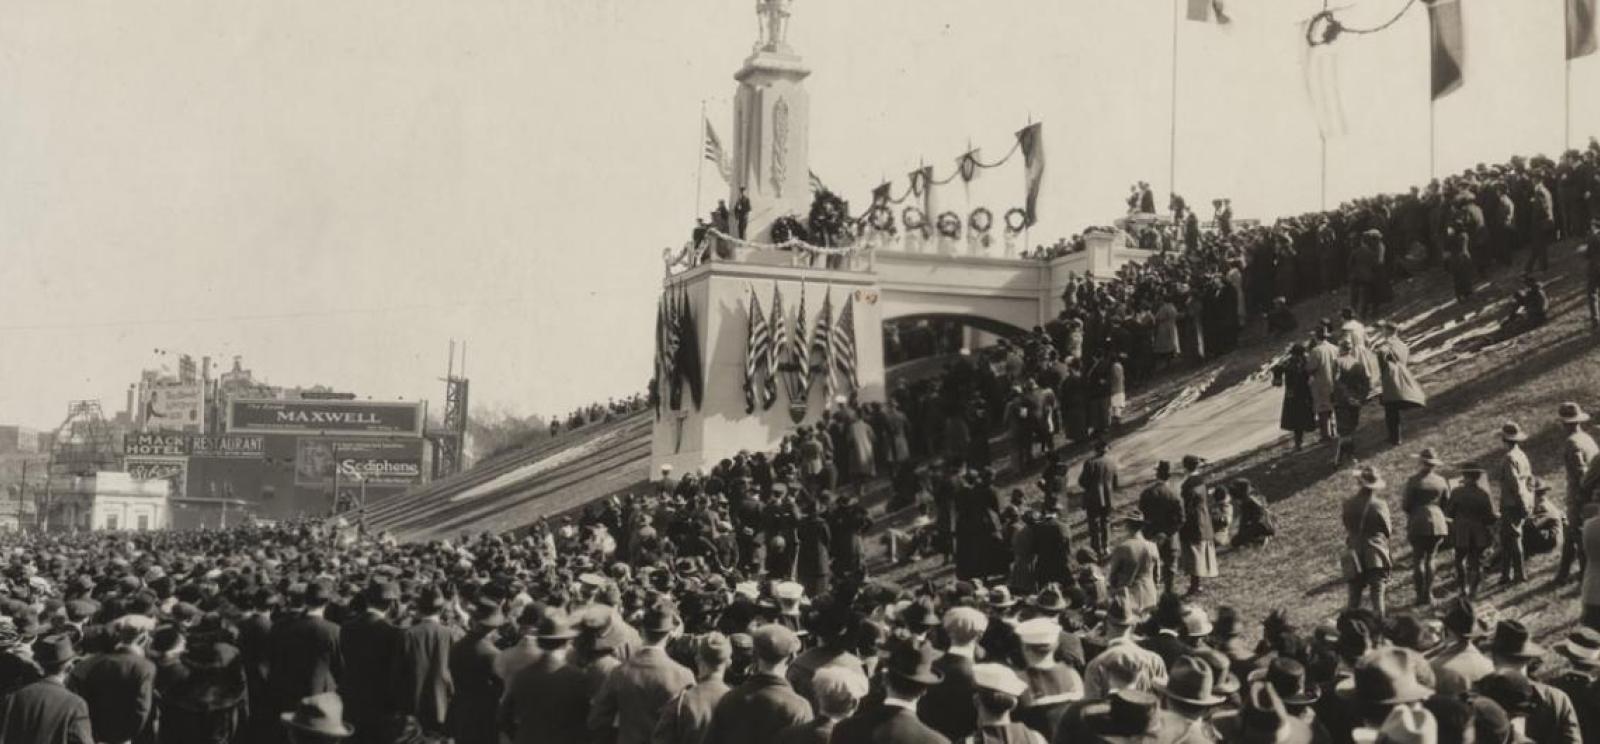 Black and white photograph of Liberty Memorial hill, crowned by a platform for speakers and flags. The hill is covered in spectators.